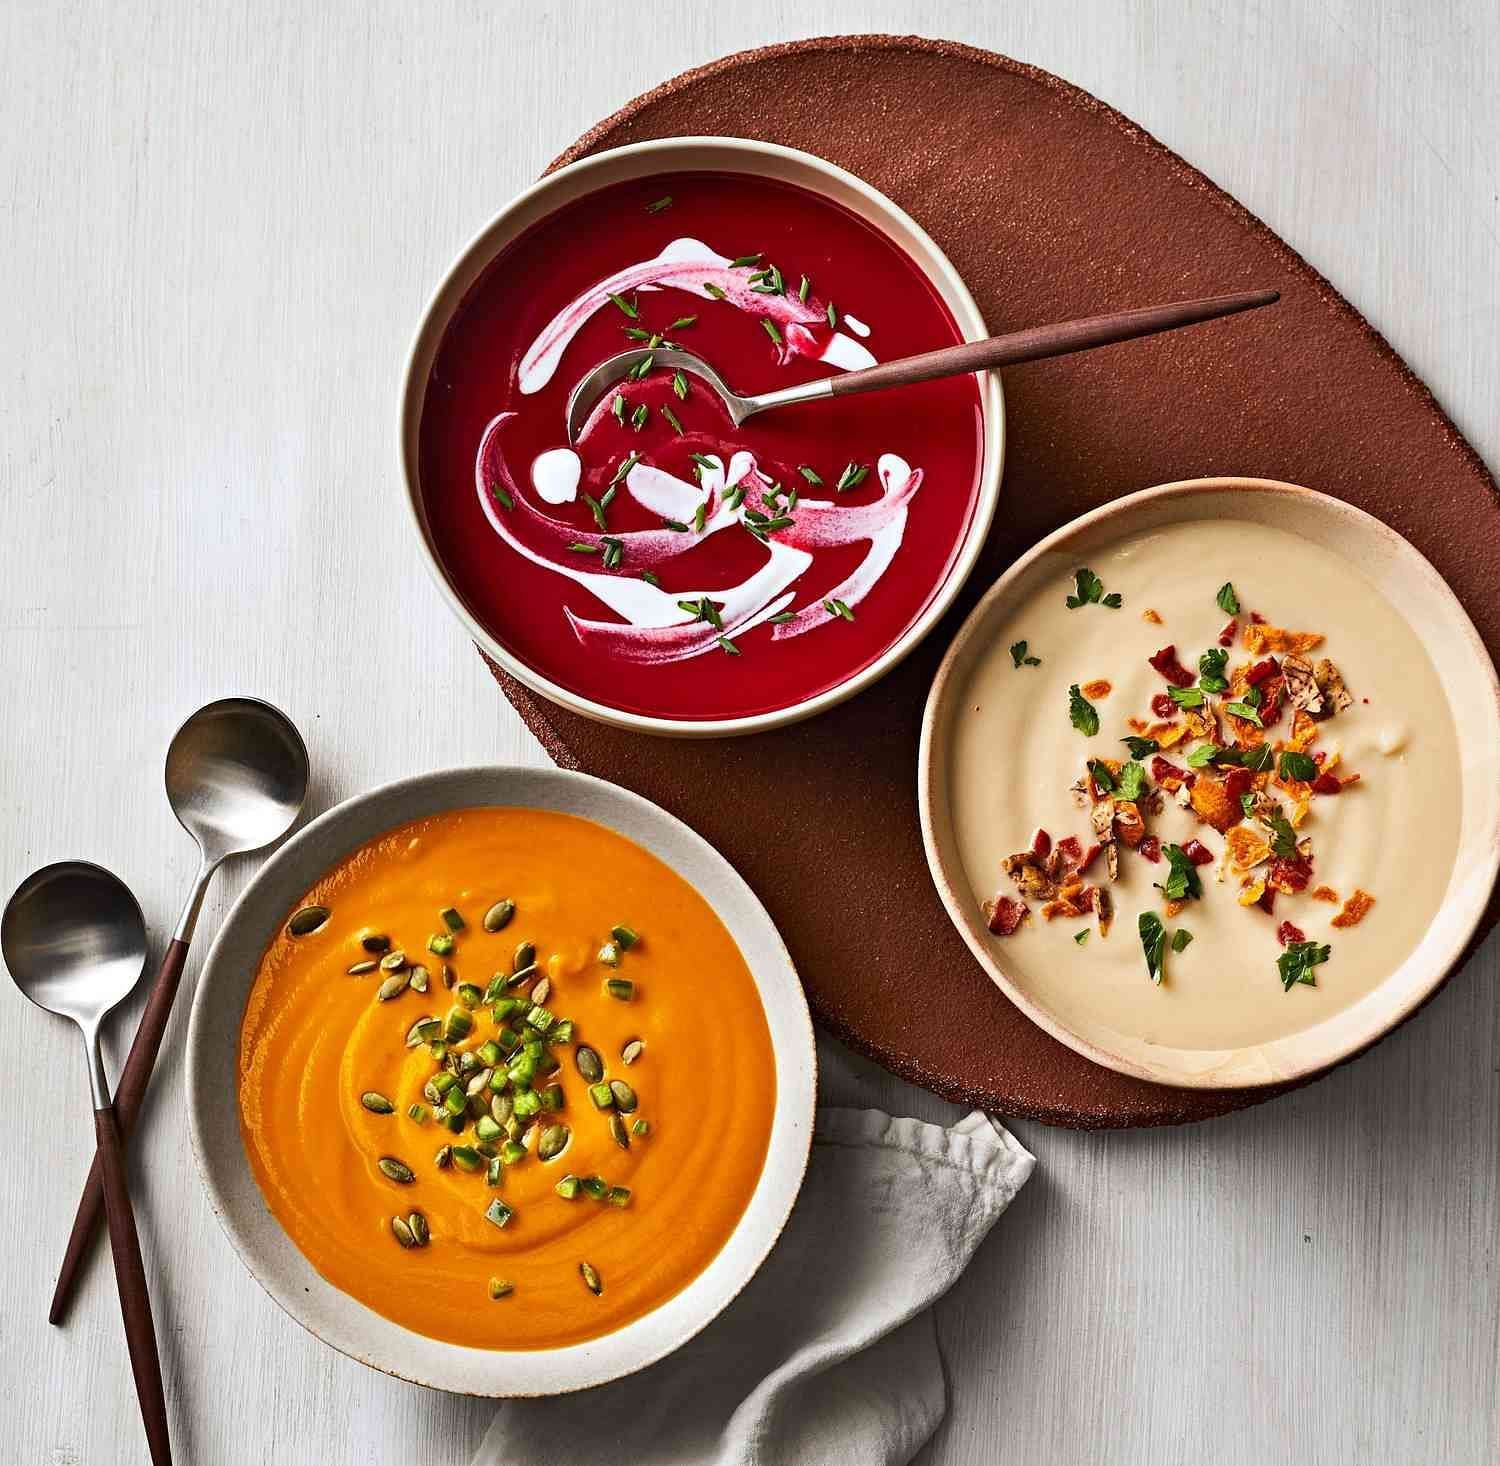 soups for you baby(Image source/southern living)